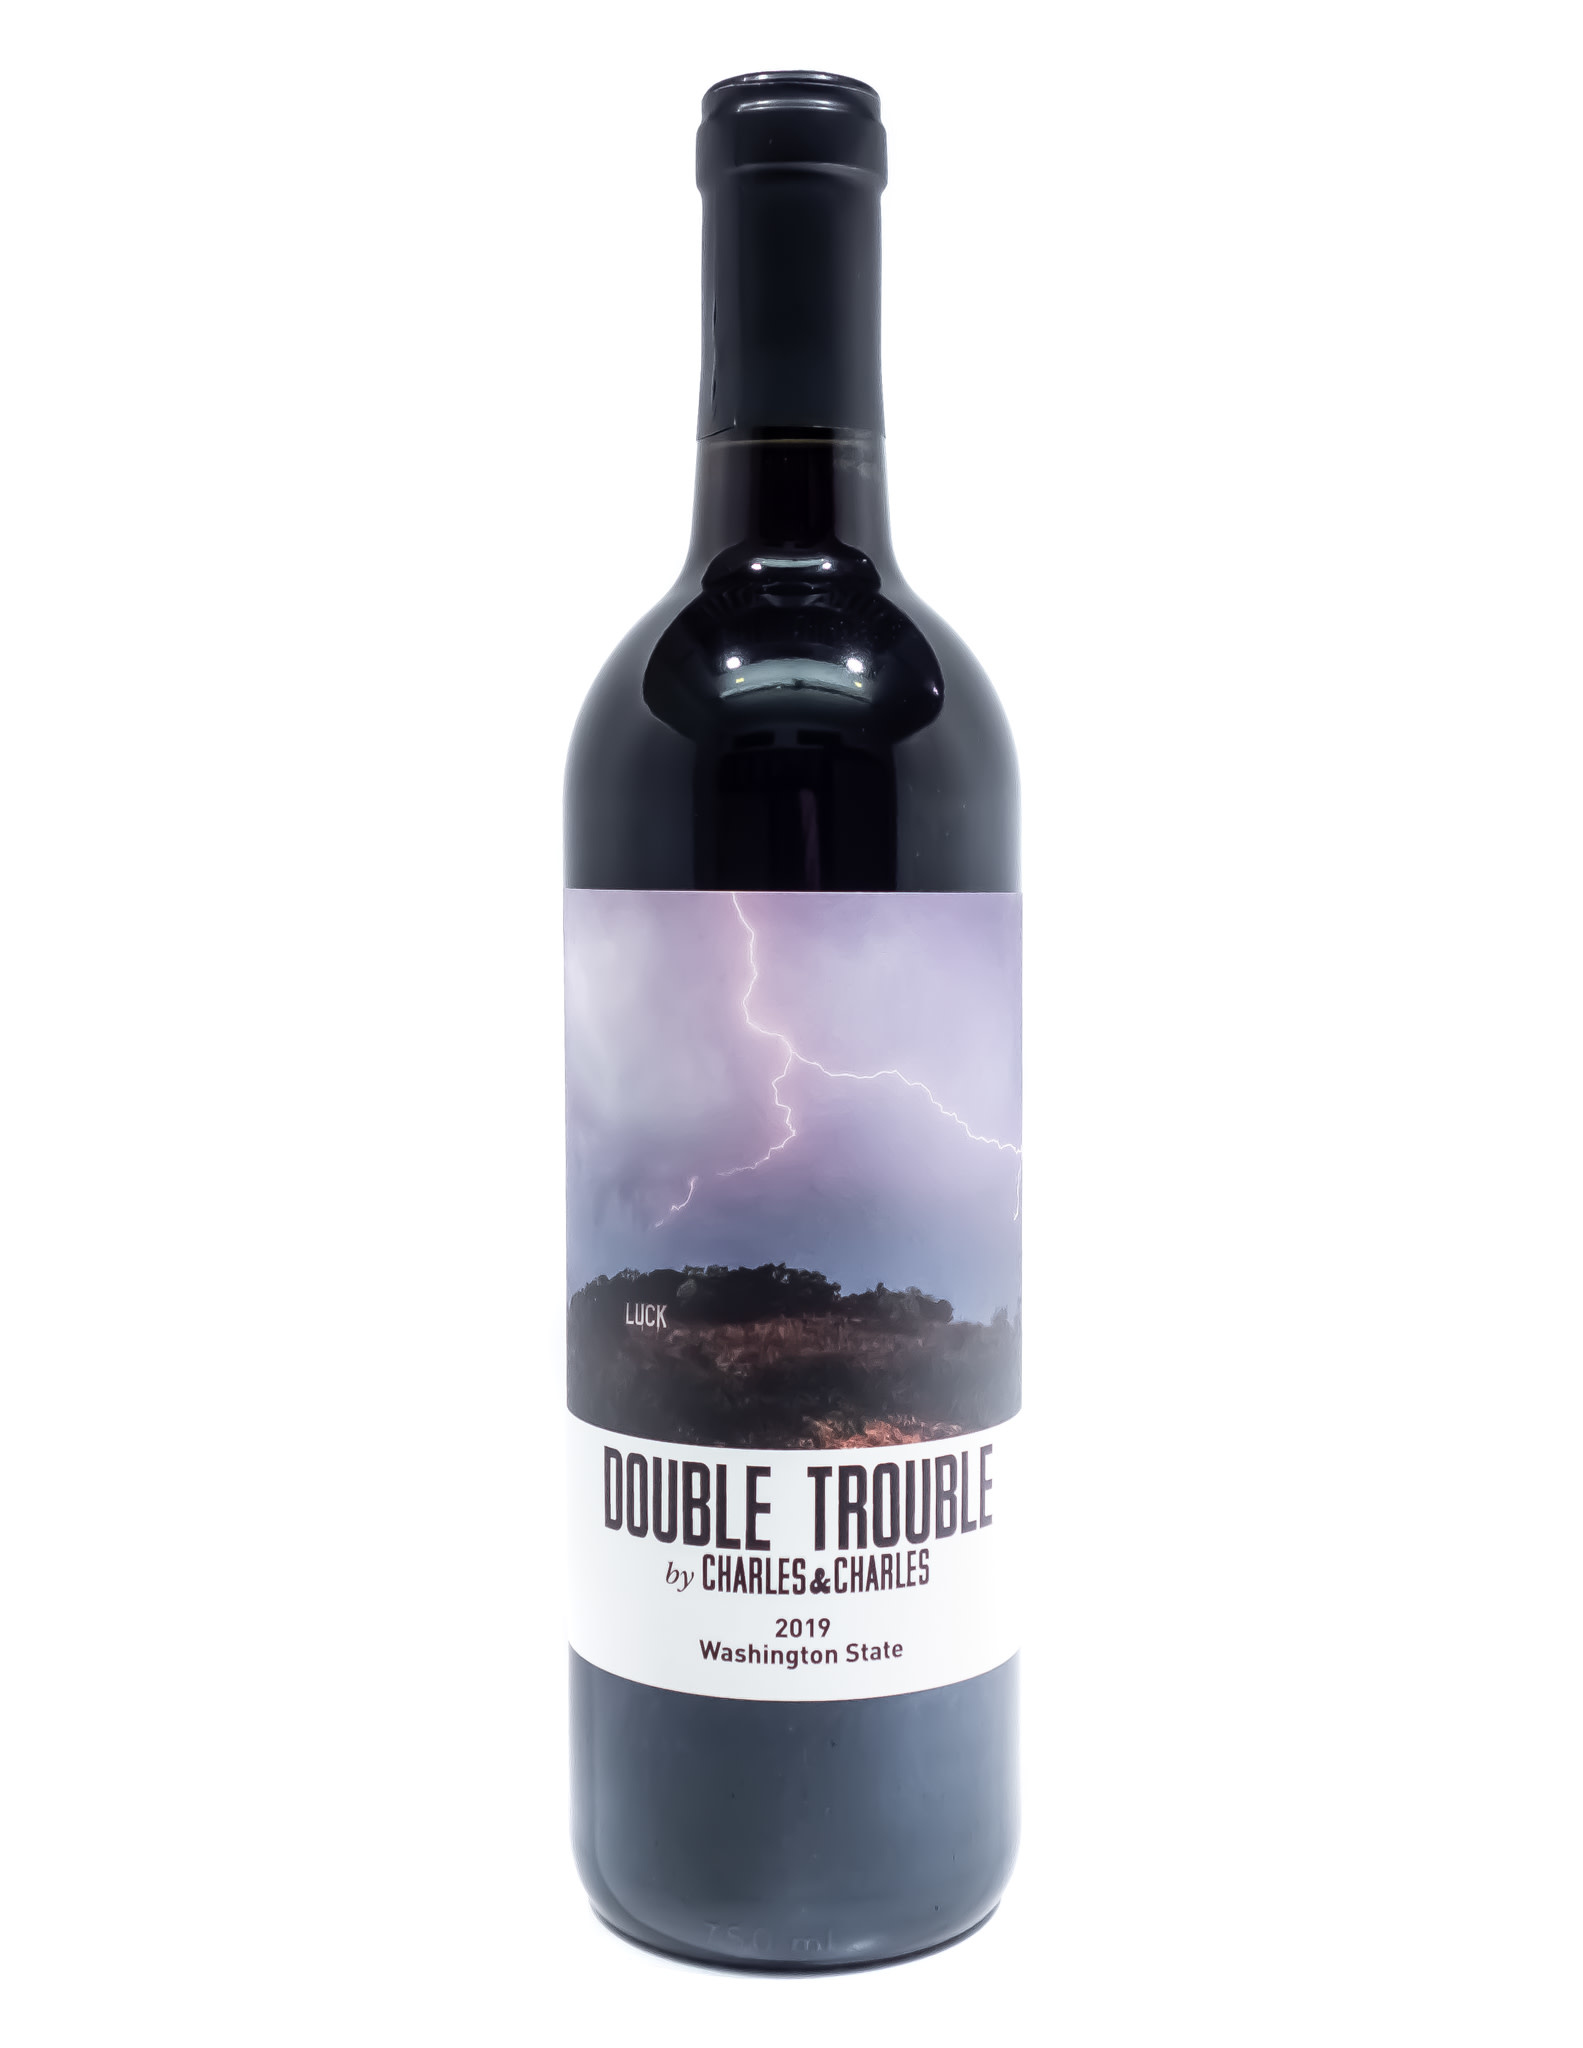 Charles & Charles 'Double Trouble' Cab Sauv-Syrah Columbia Valley 2019